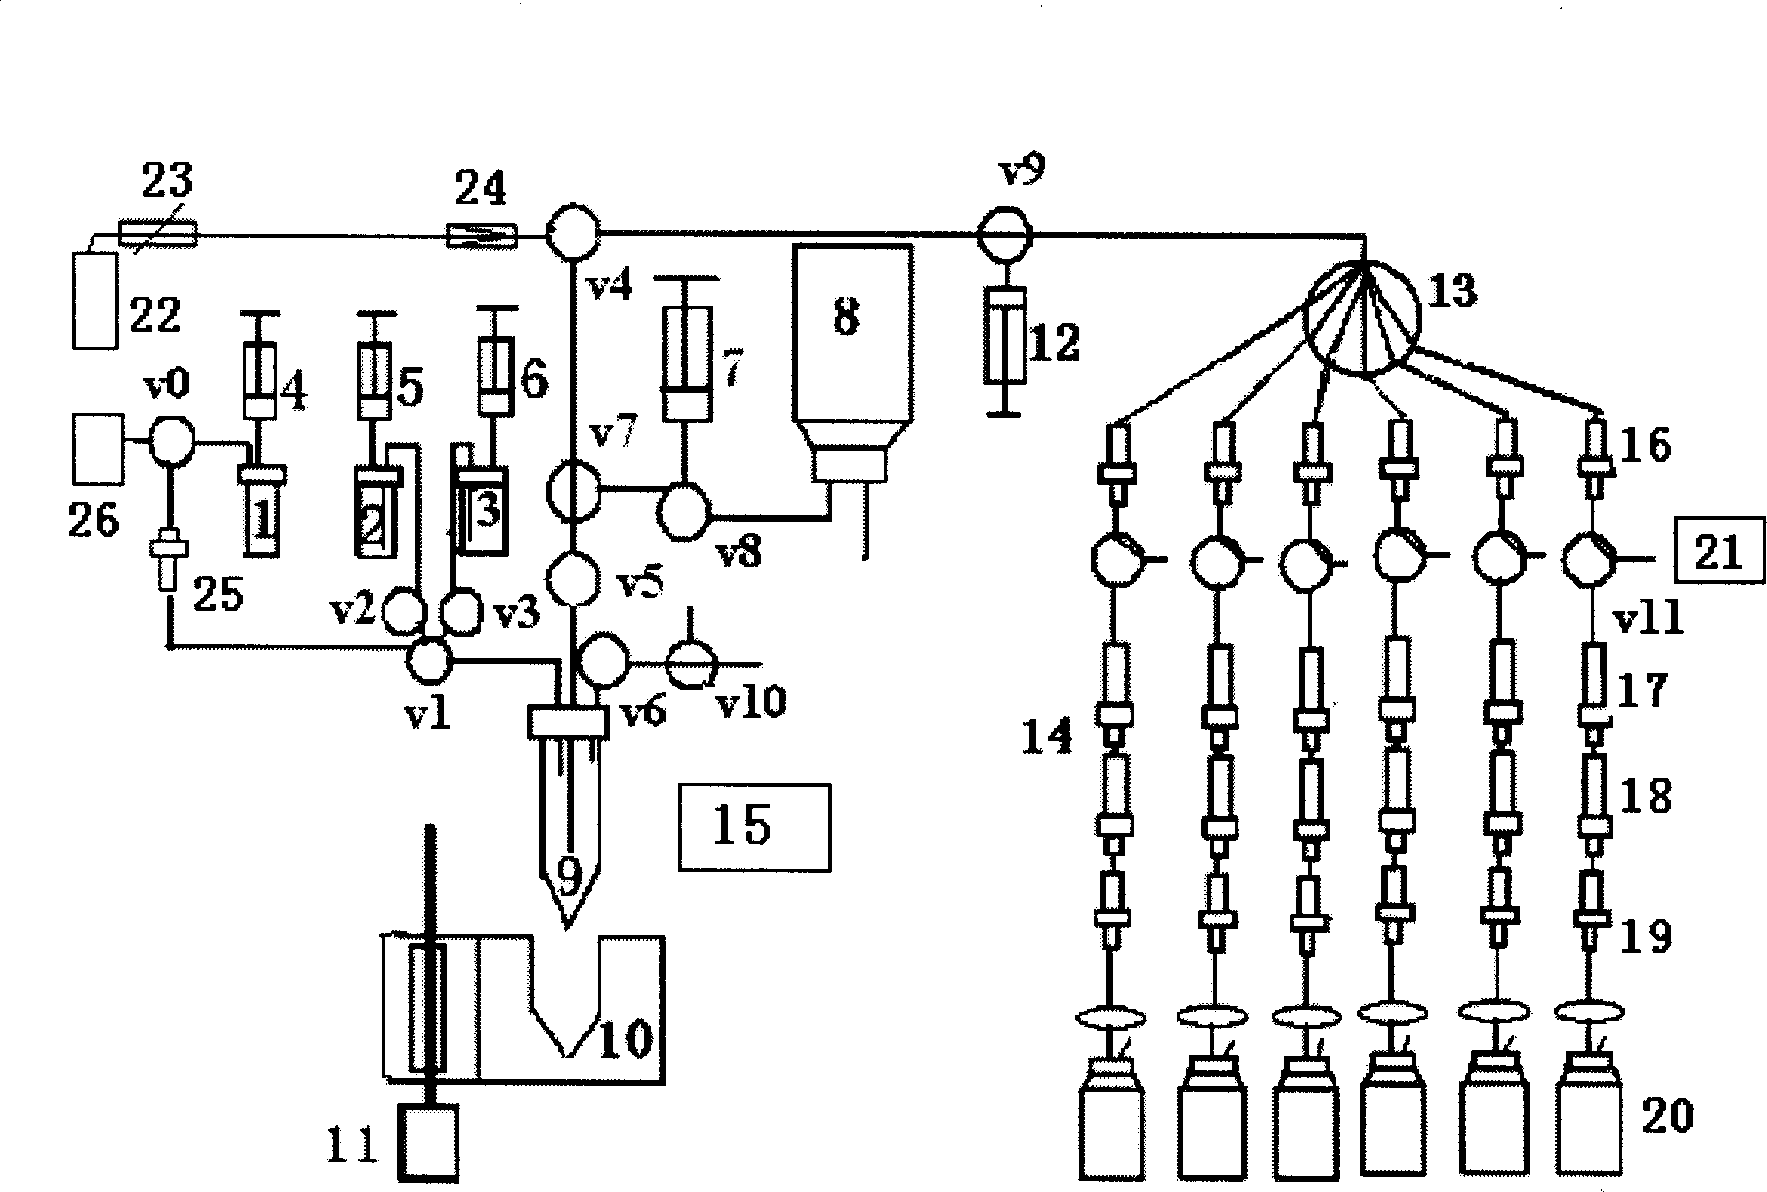 18F-FDG automatization synthetic method and device